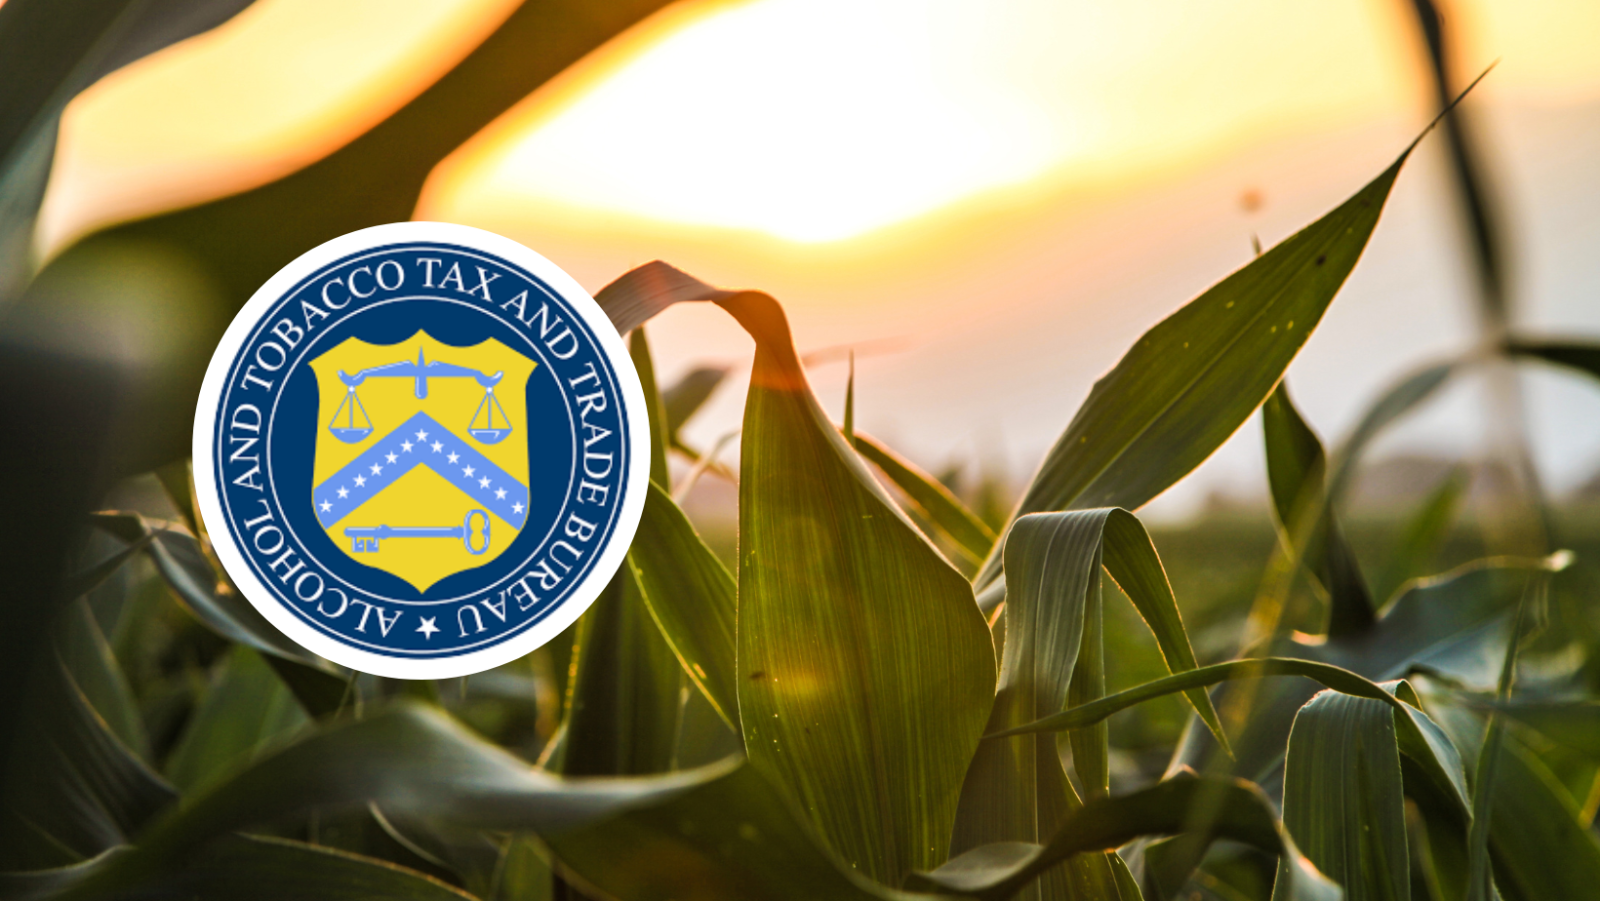 The Alcohol and Tobacco Tax and Trade Bureau logo over a photo of corn field